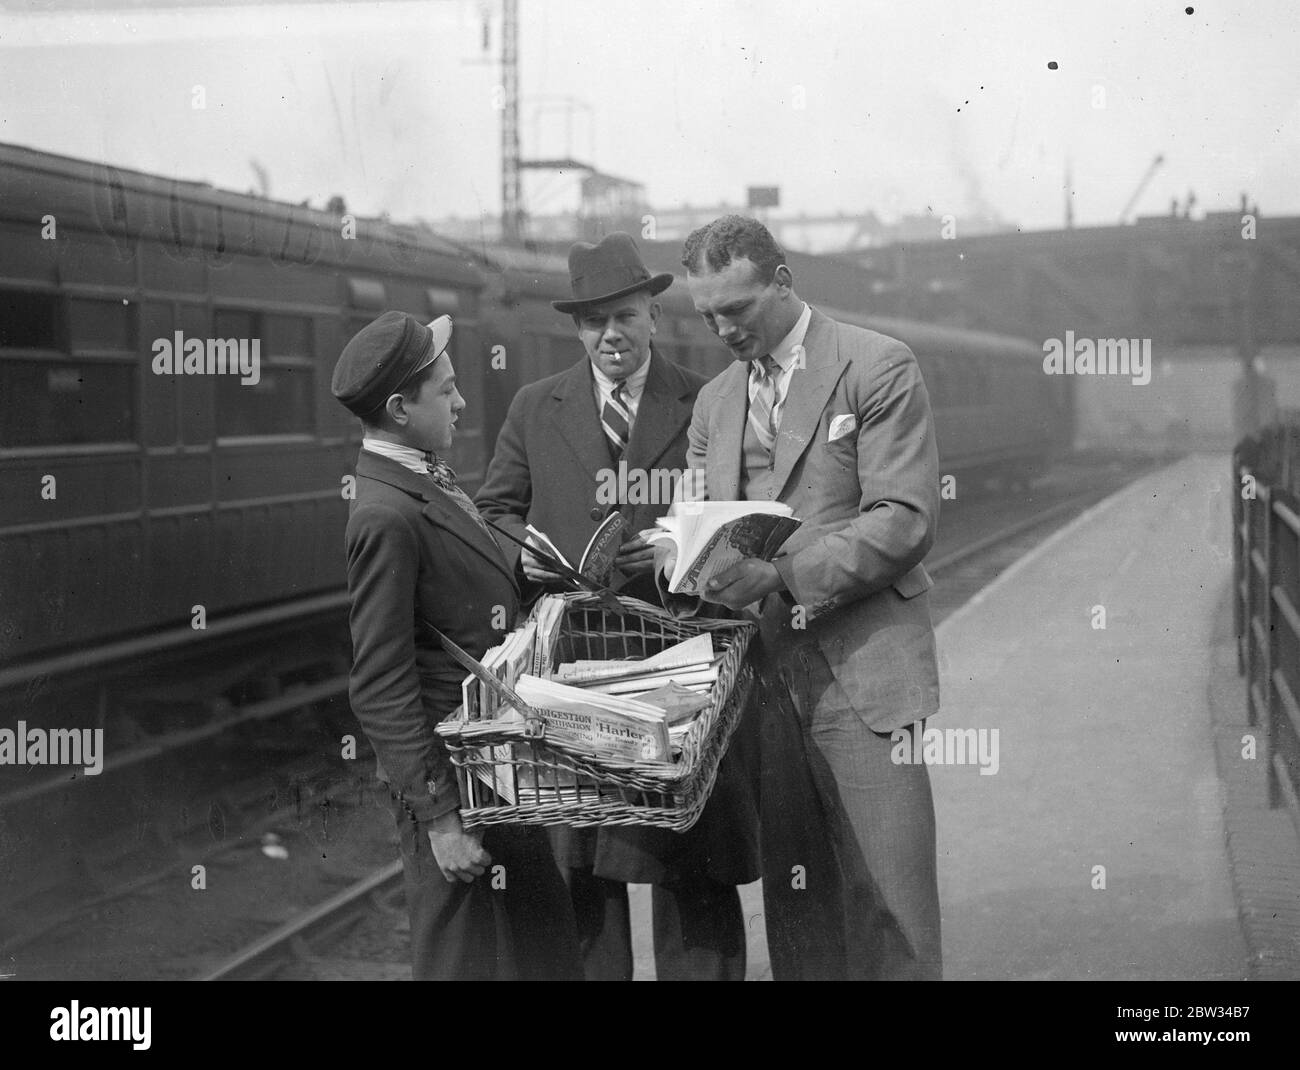 Reggie Meen leaves for Egypt for Championship fight . Reggie Meen the heavyweight boxing champion of Britain left England on the S S Ballarat for Egypt to fight Salar ed Din , the Egyptian Champion in Cairo . Reggie Meen with his trainer Mr Jim Panter buying a magazine at Liverpool Street Station , before leaving for Egypt . 15 April 1932 . Stock Photo